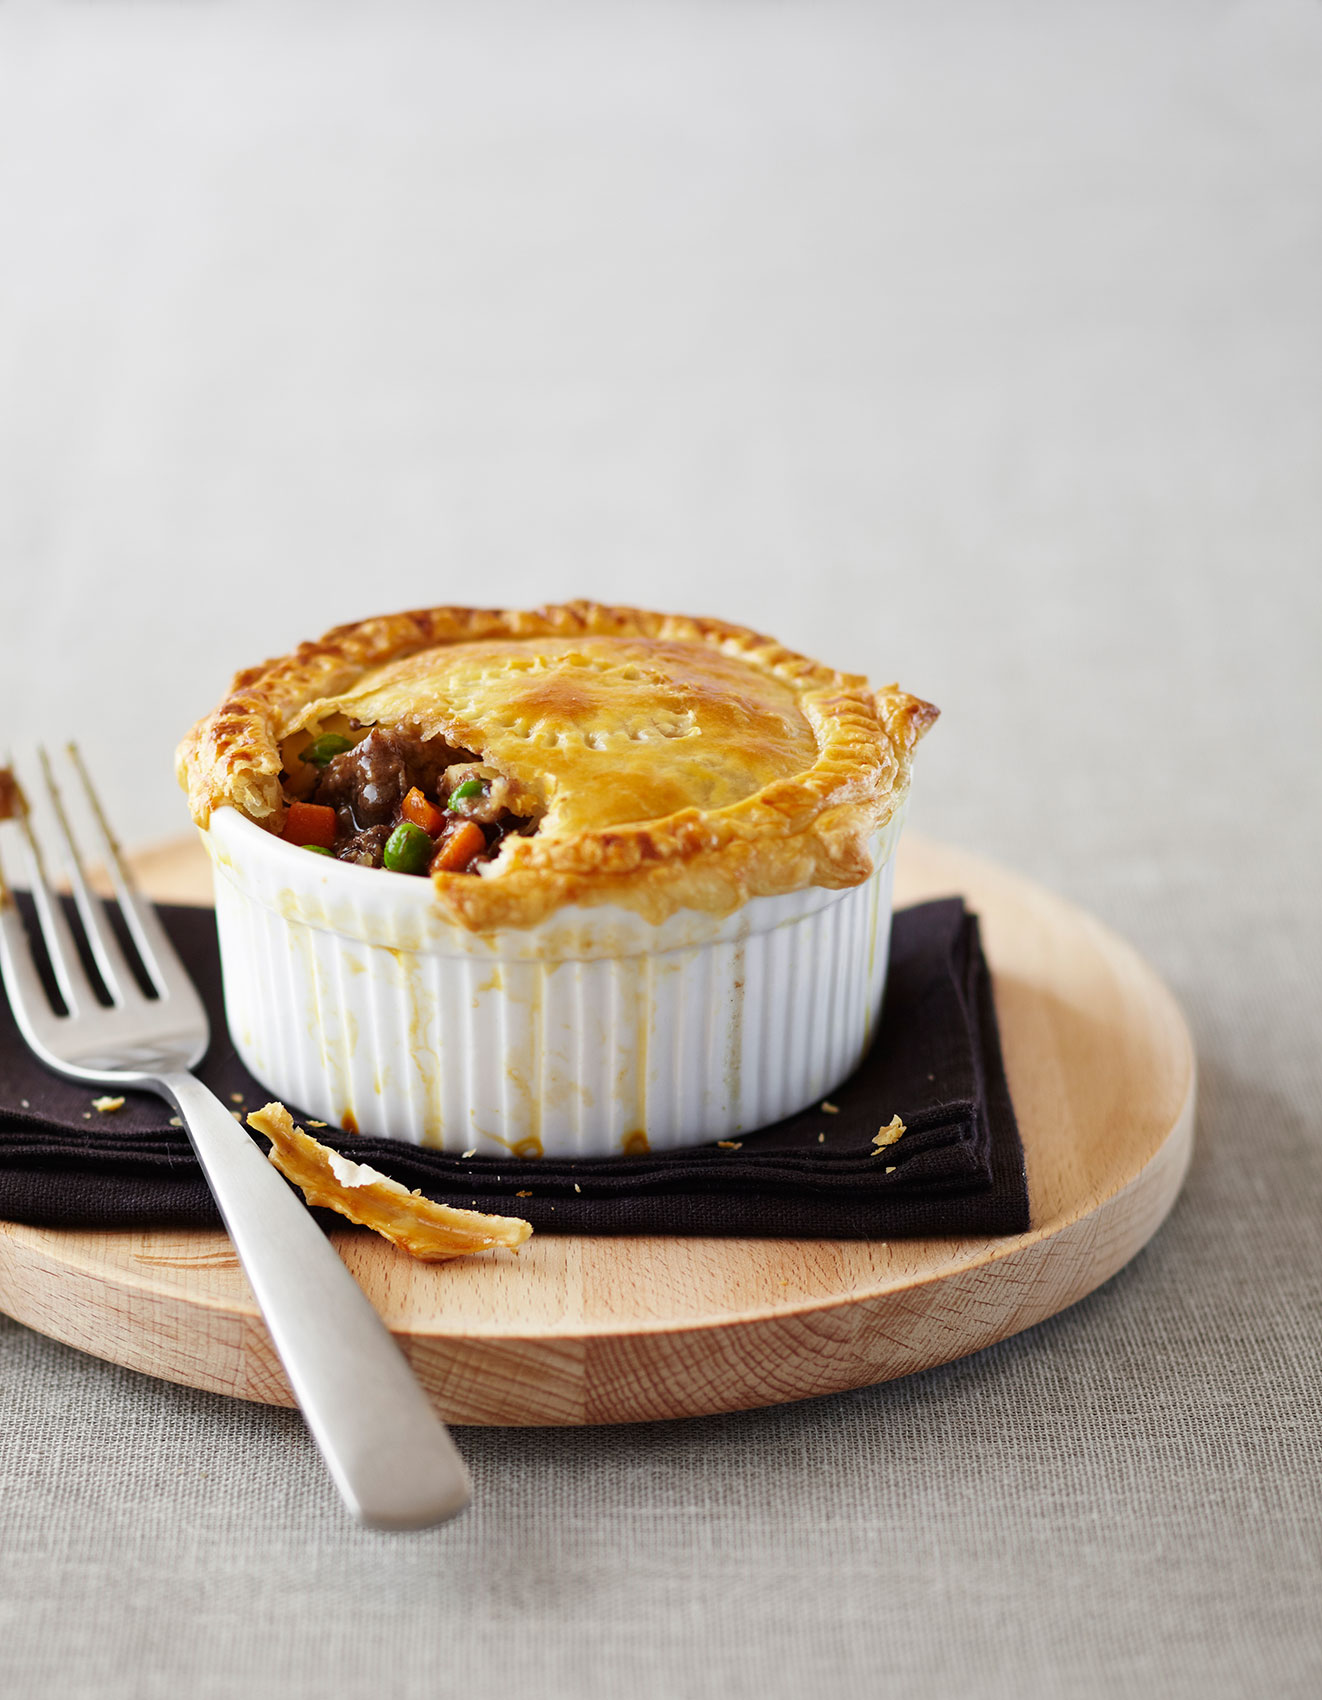 Vanilla Table • Oxtail & Vegetable Pie in White Ramekin on Wooden Board • Cookbook & EditorialVanilla Table • Dancing Chef Smoked Trout with Sprouts & Red Onions • Cookbook & Editorial Food Photography